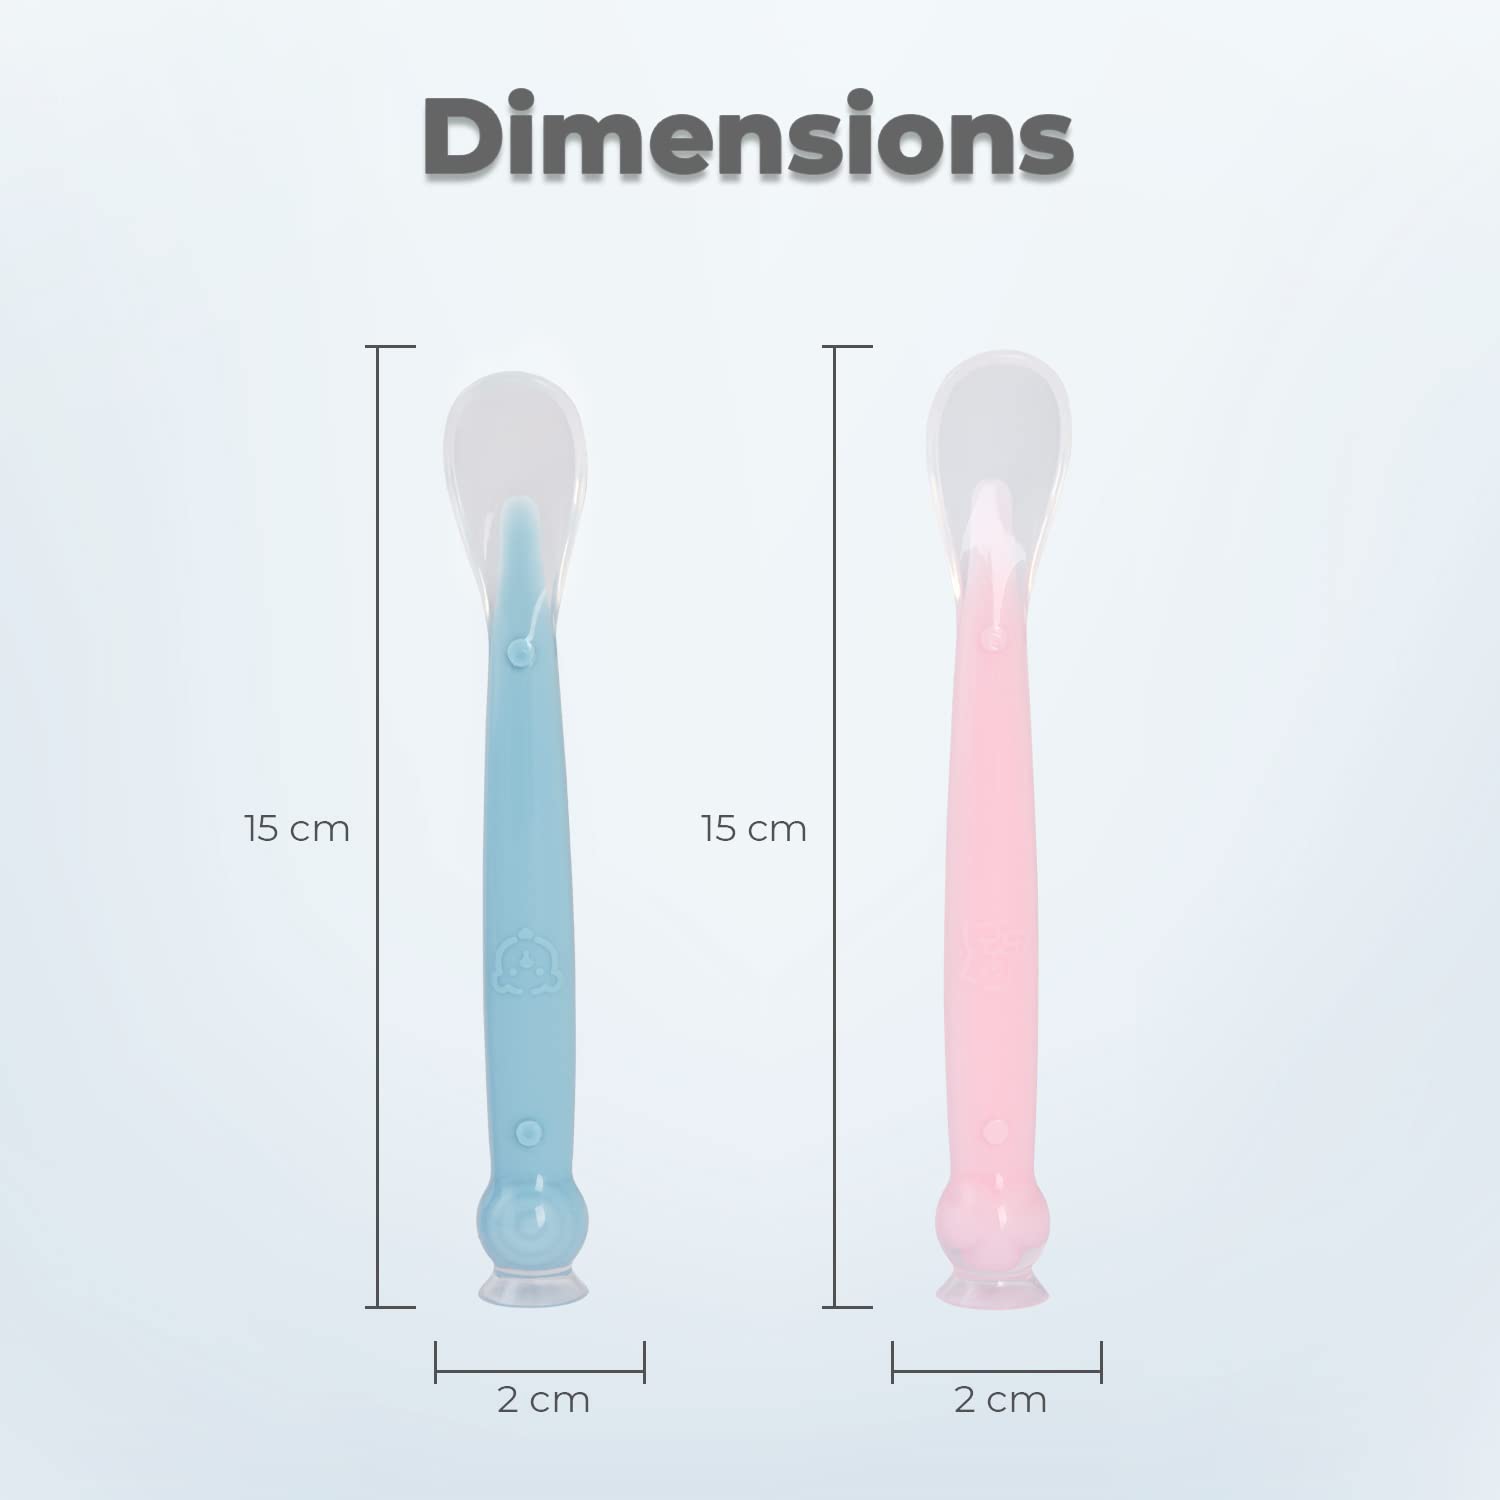 R FOR RABBIT Safe Feed Silicon Spoon For Babies, 2pcs - Pink & Blue 6m+